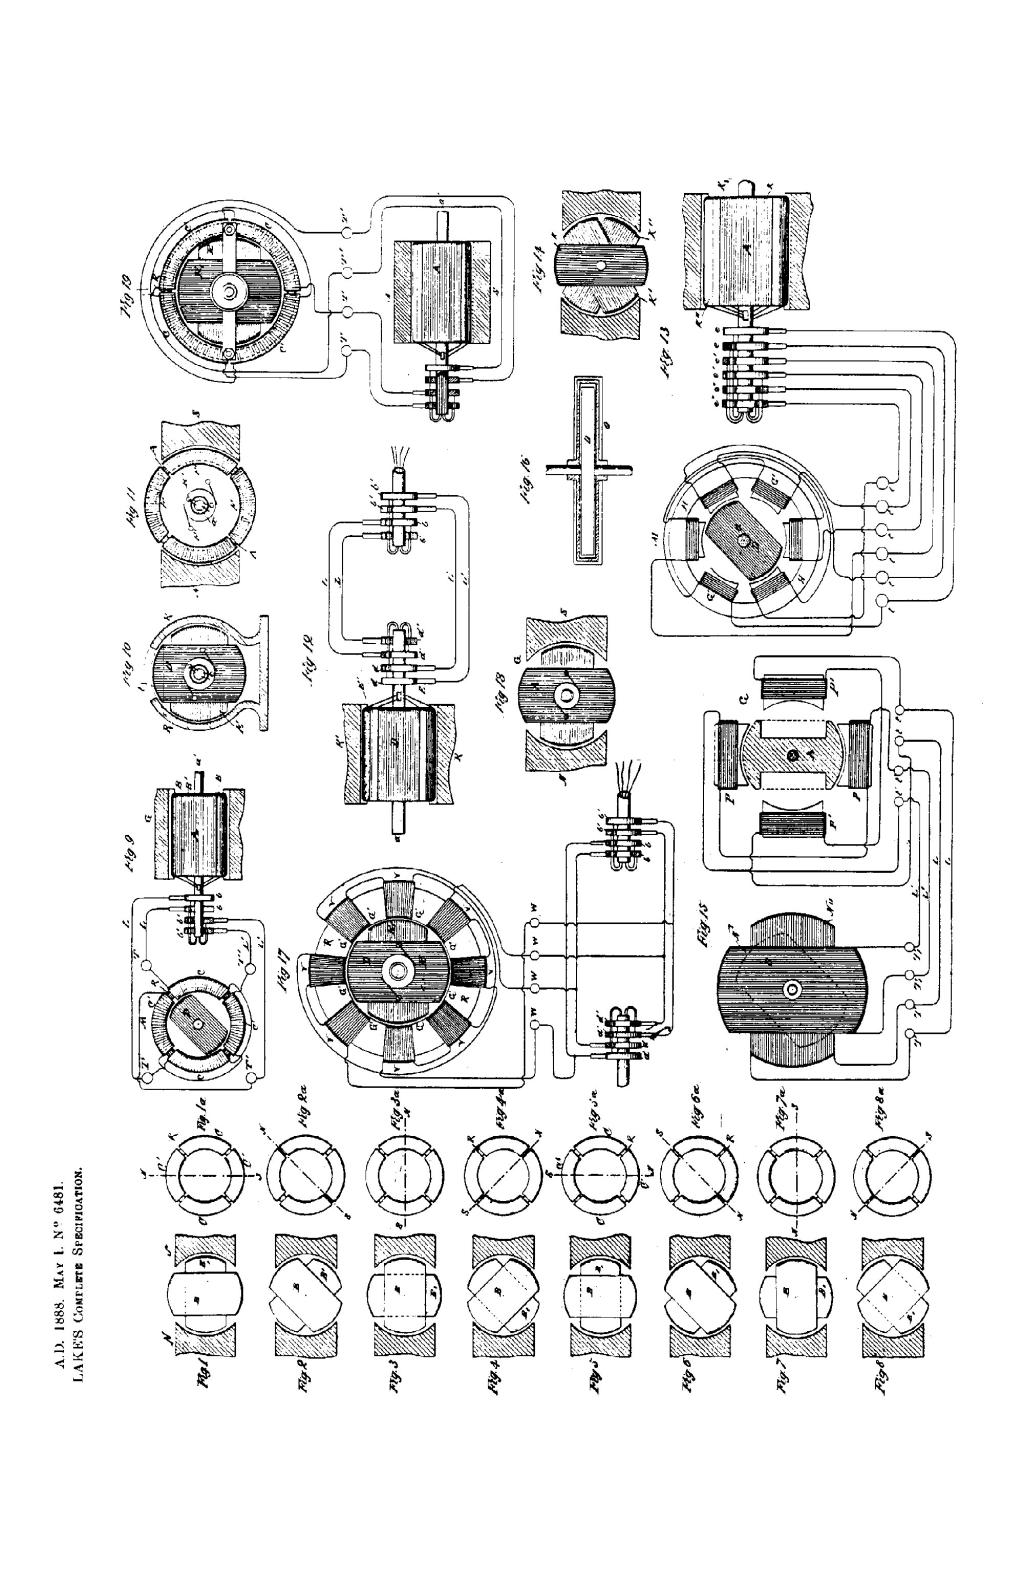 Nikola Tesla British Patent 6481 - Improvements Relating to the Electrical Transmission of Power and to Apparatus Therefor - Image 1